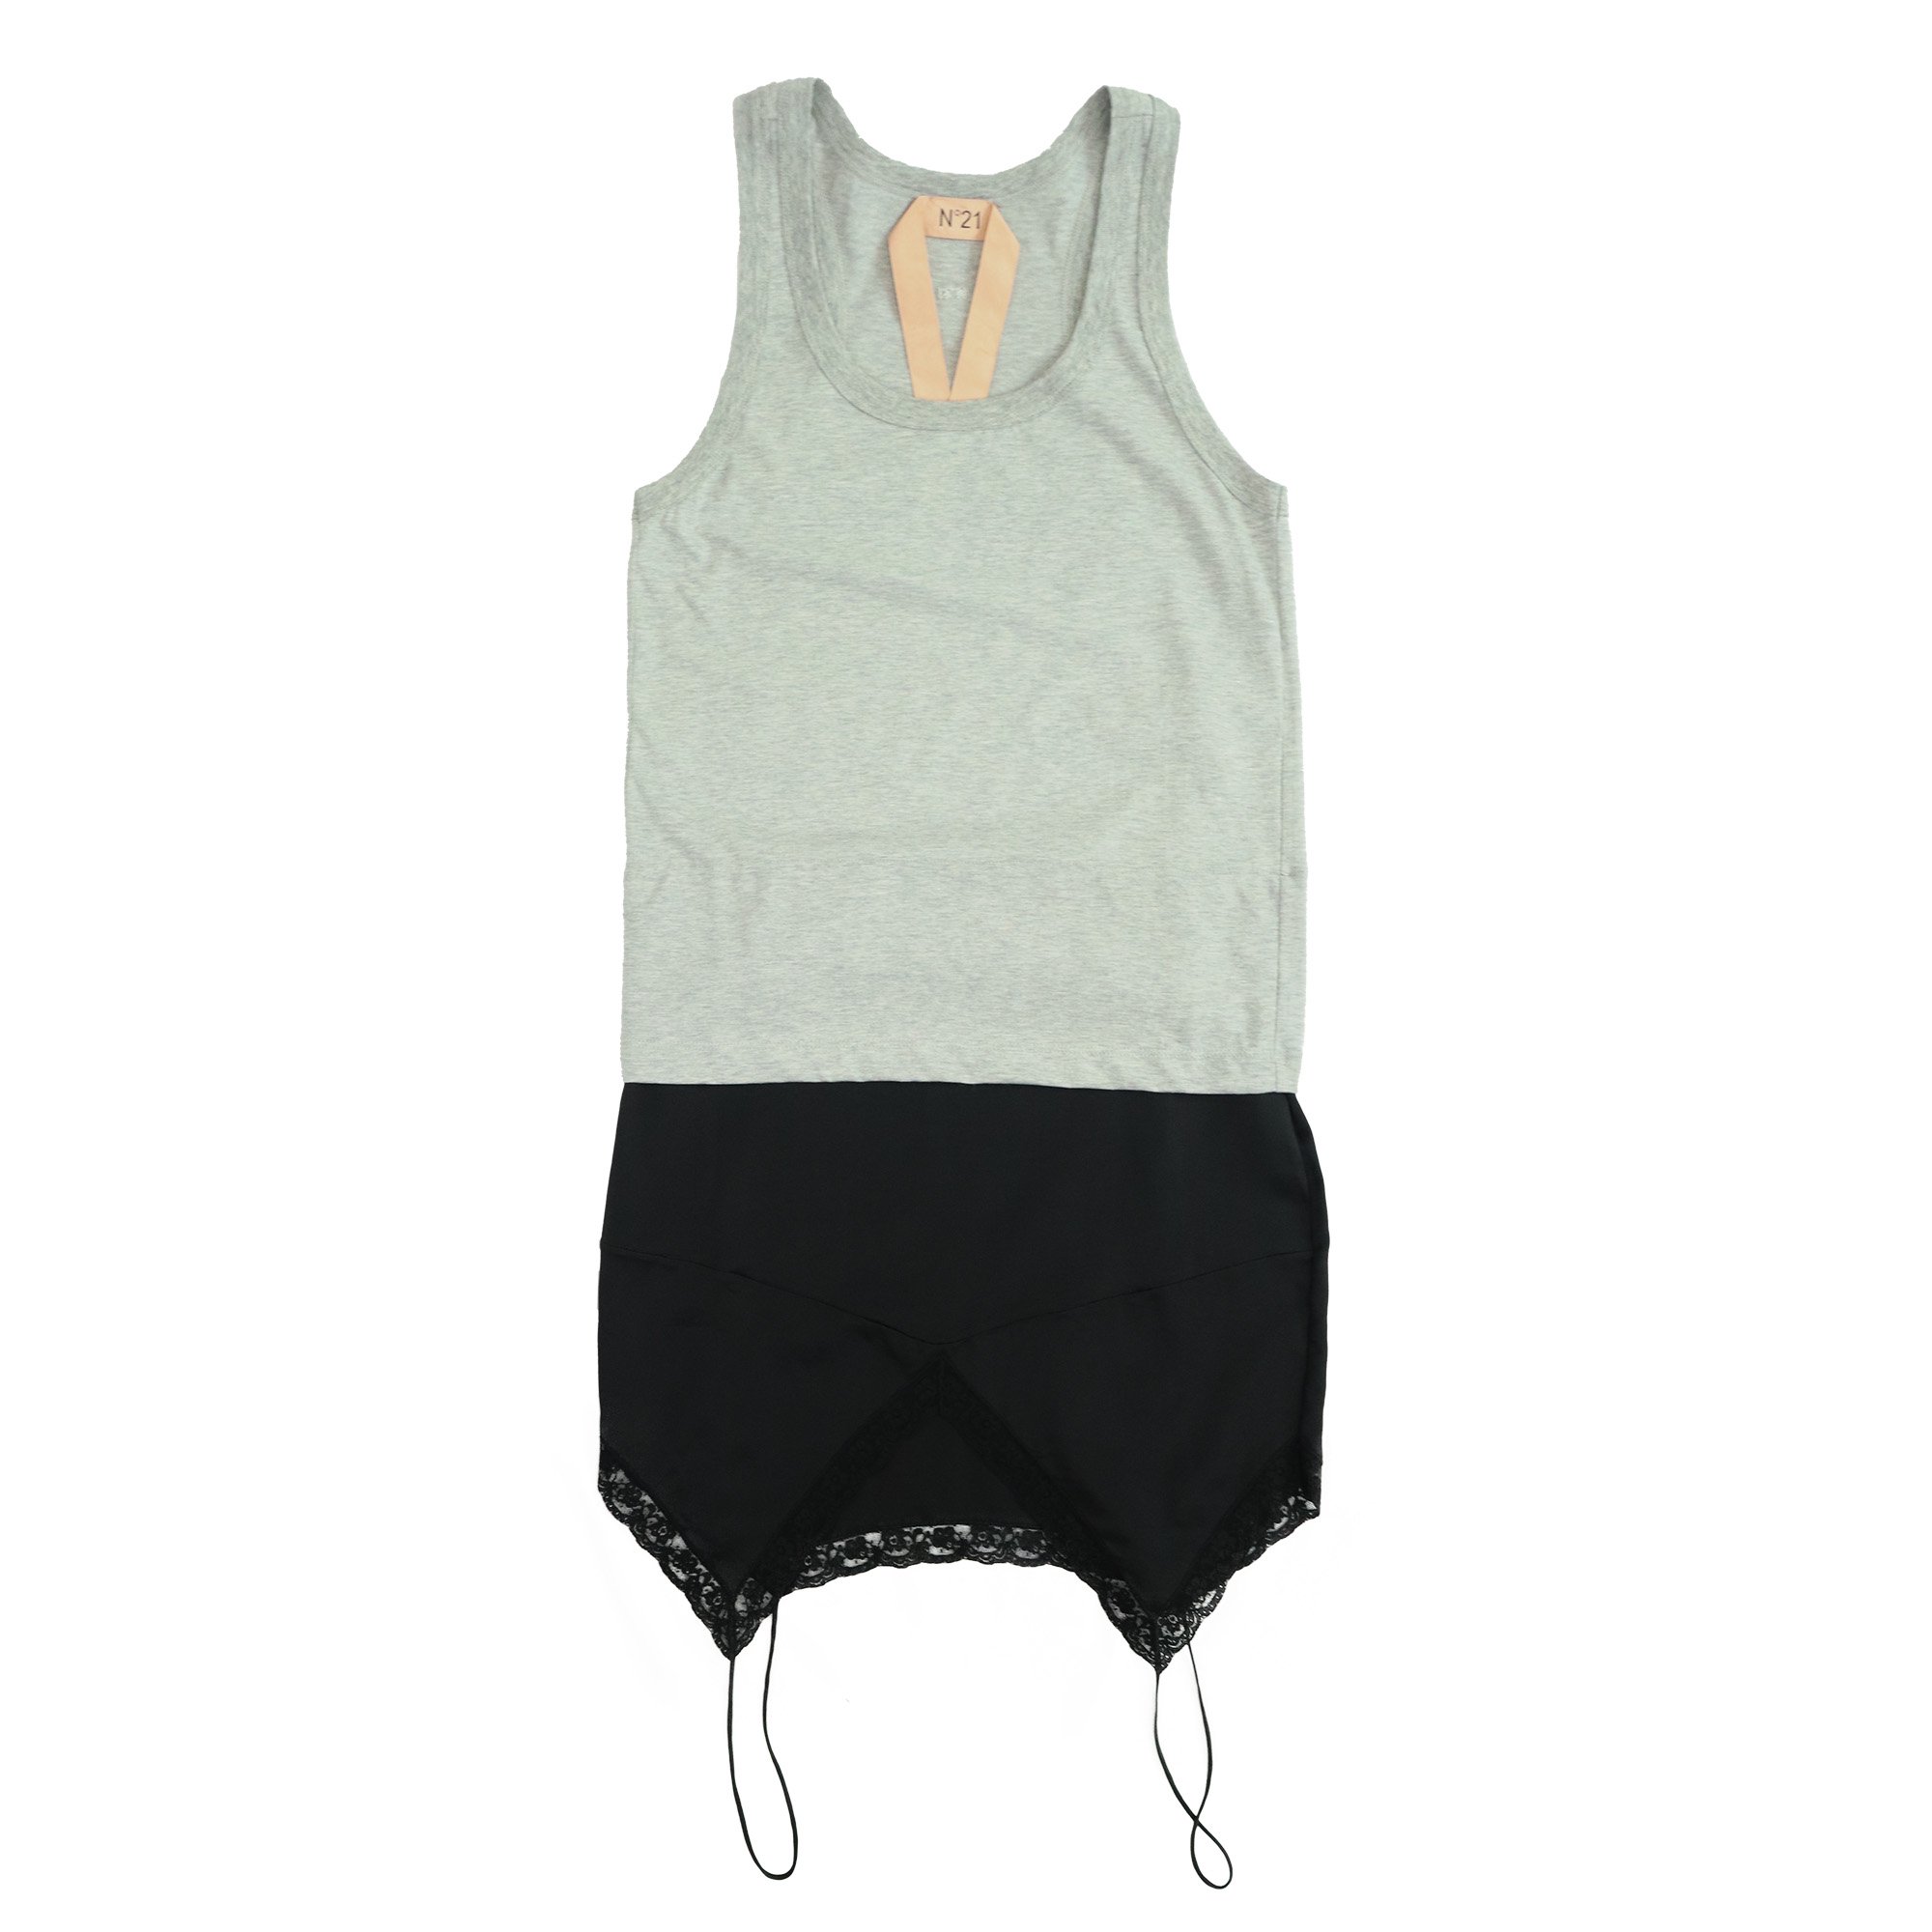 <img class='new_mark_img1' src='https://img.shop-pro.jp/img/new/icons21.gif' style='border:none;display:inline;margin:0px;padding:0px;width:auto;' />N21 DOCKING TANKTOP30%OFF